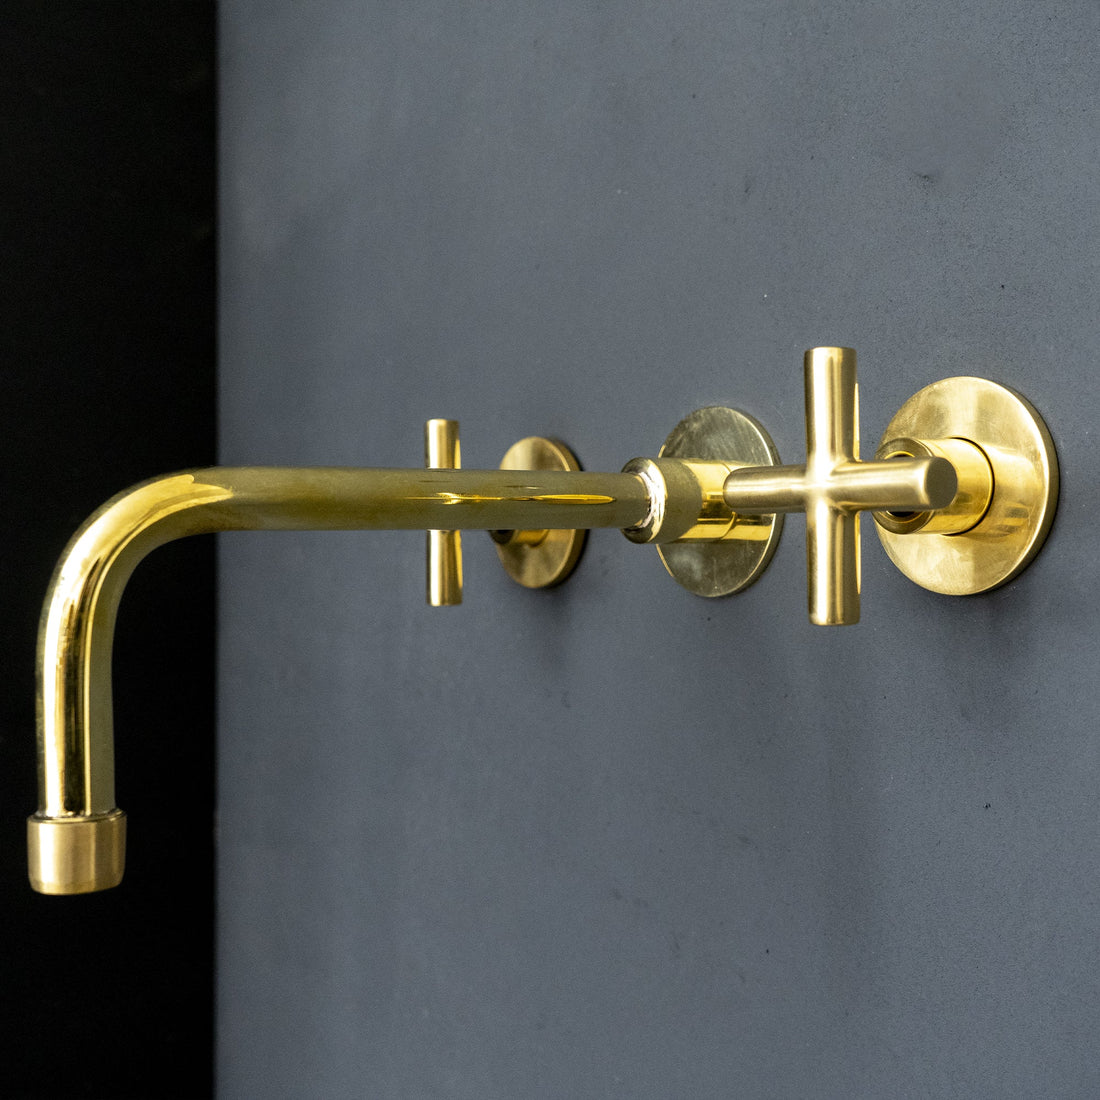 Handcrafted Brass Wall Mounted Faucet - Brassna